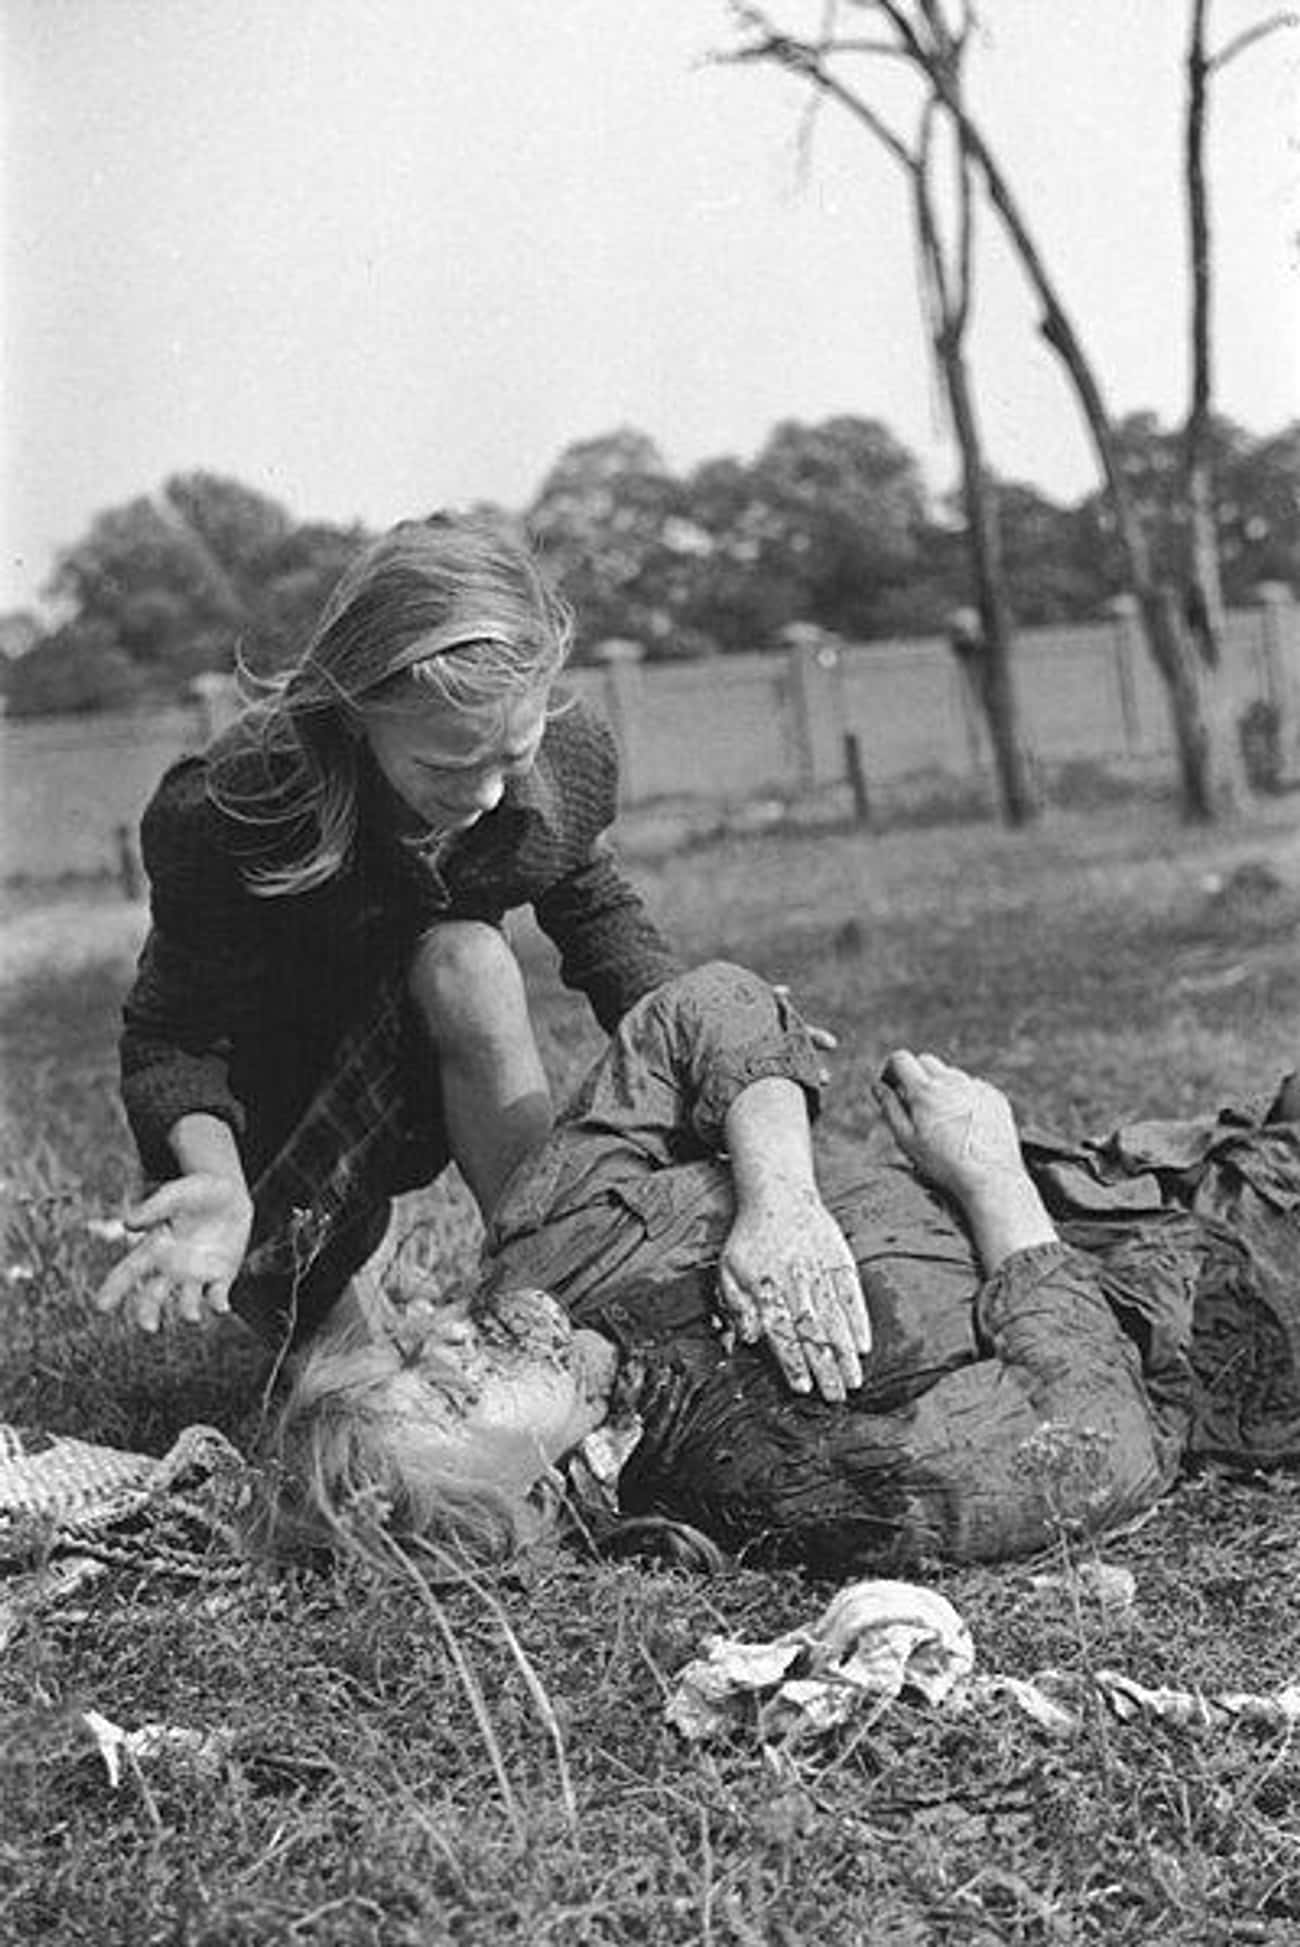 The Polish Girl Mourning Her Sister Survived Until 2020 And Never Forgave The Luftwaffe